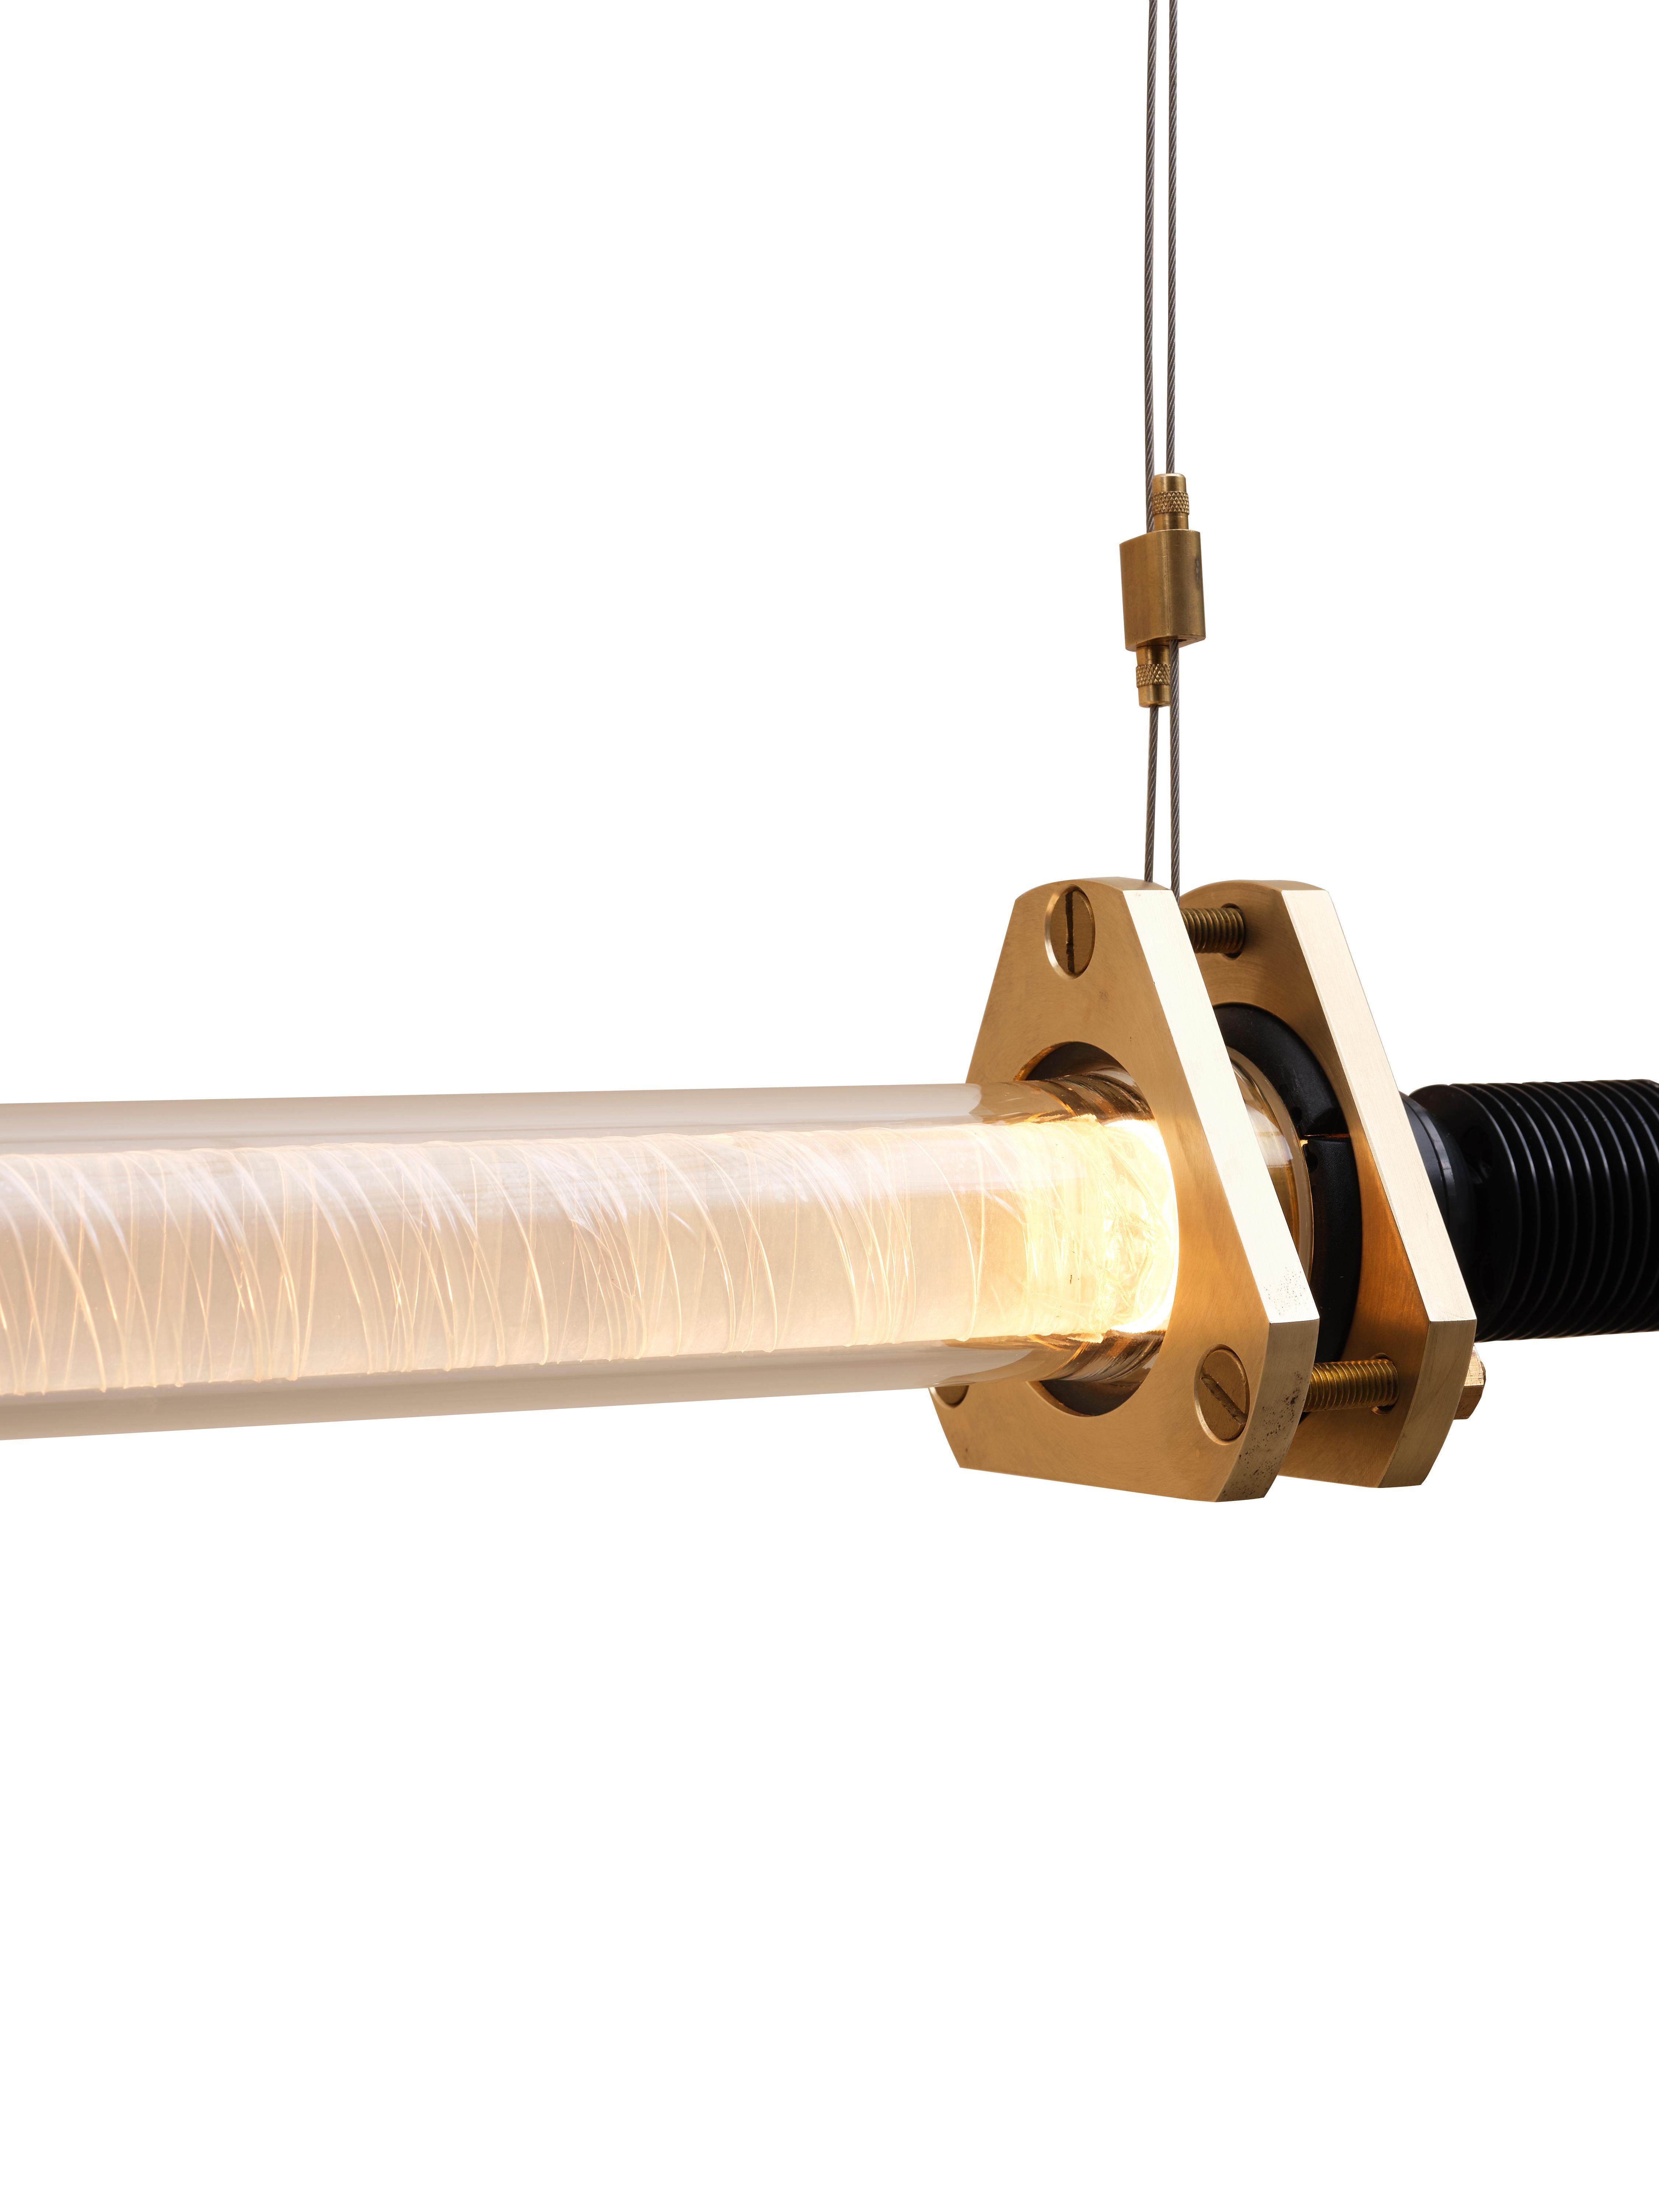 Tube S Light, 2022

Evolving Nita’s ongoing exploration of light, the Tube suspension light showcases Borosilicate glass tubes typically found in heavy industrial chemical plants. Each conceals a transparent, curved PMMA rod wrapped in cellophane